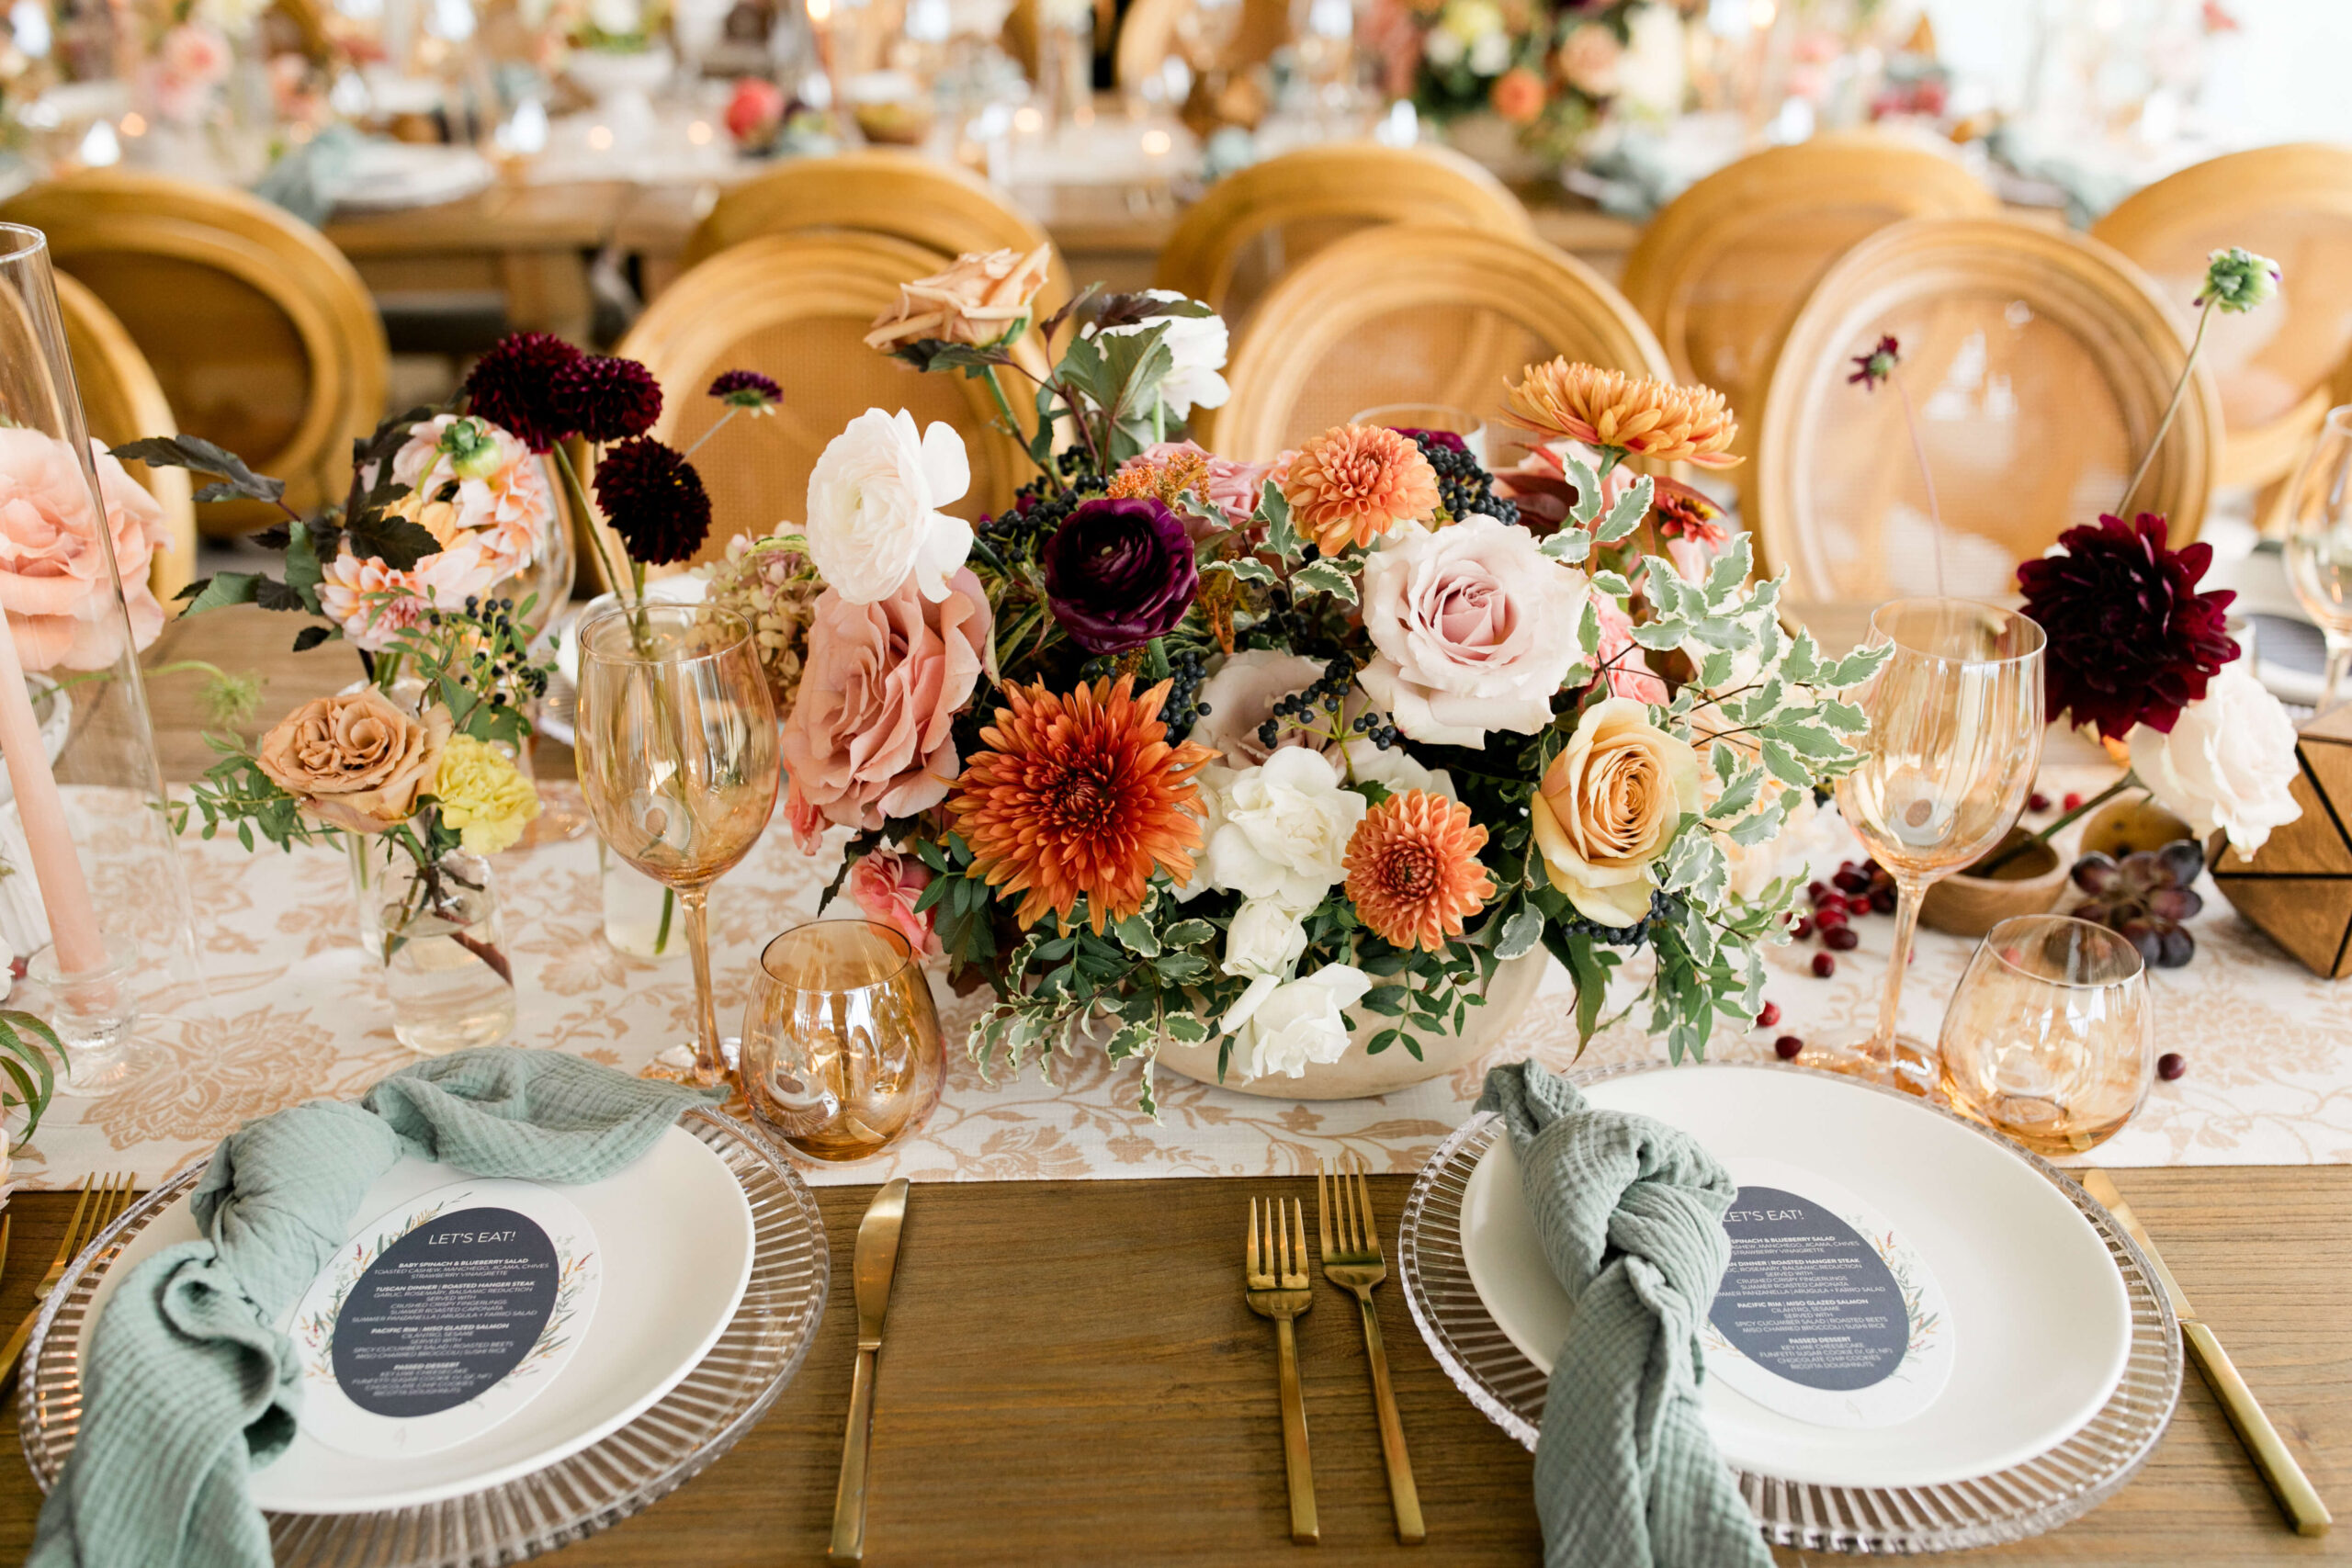 Reception table decorated with fresh fruit and vibrant florals